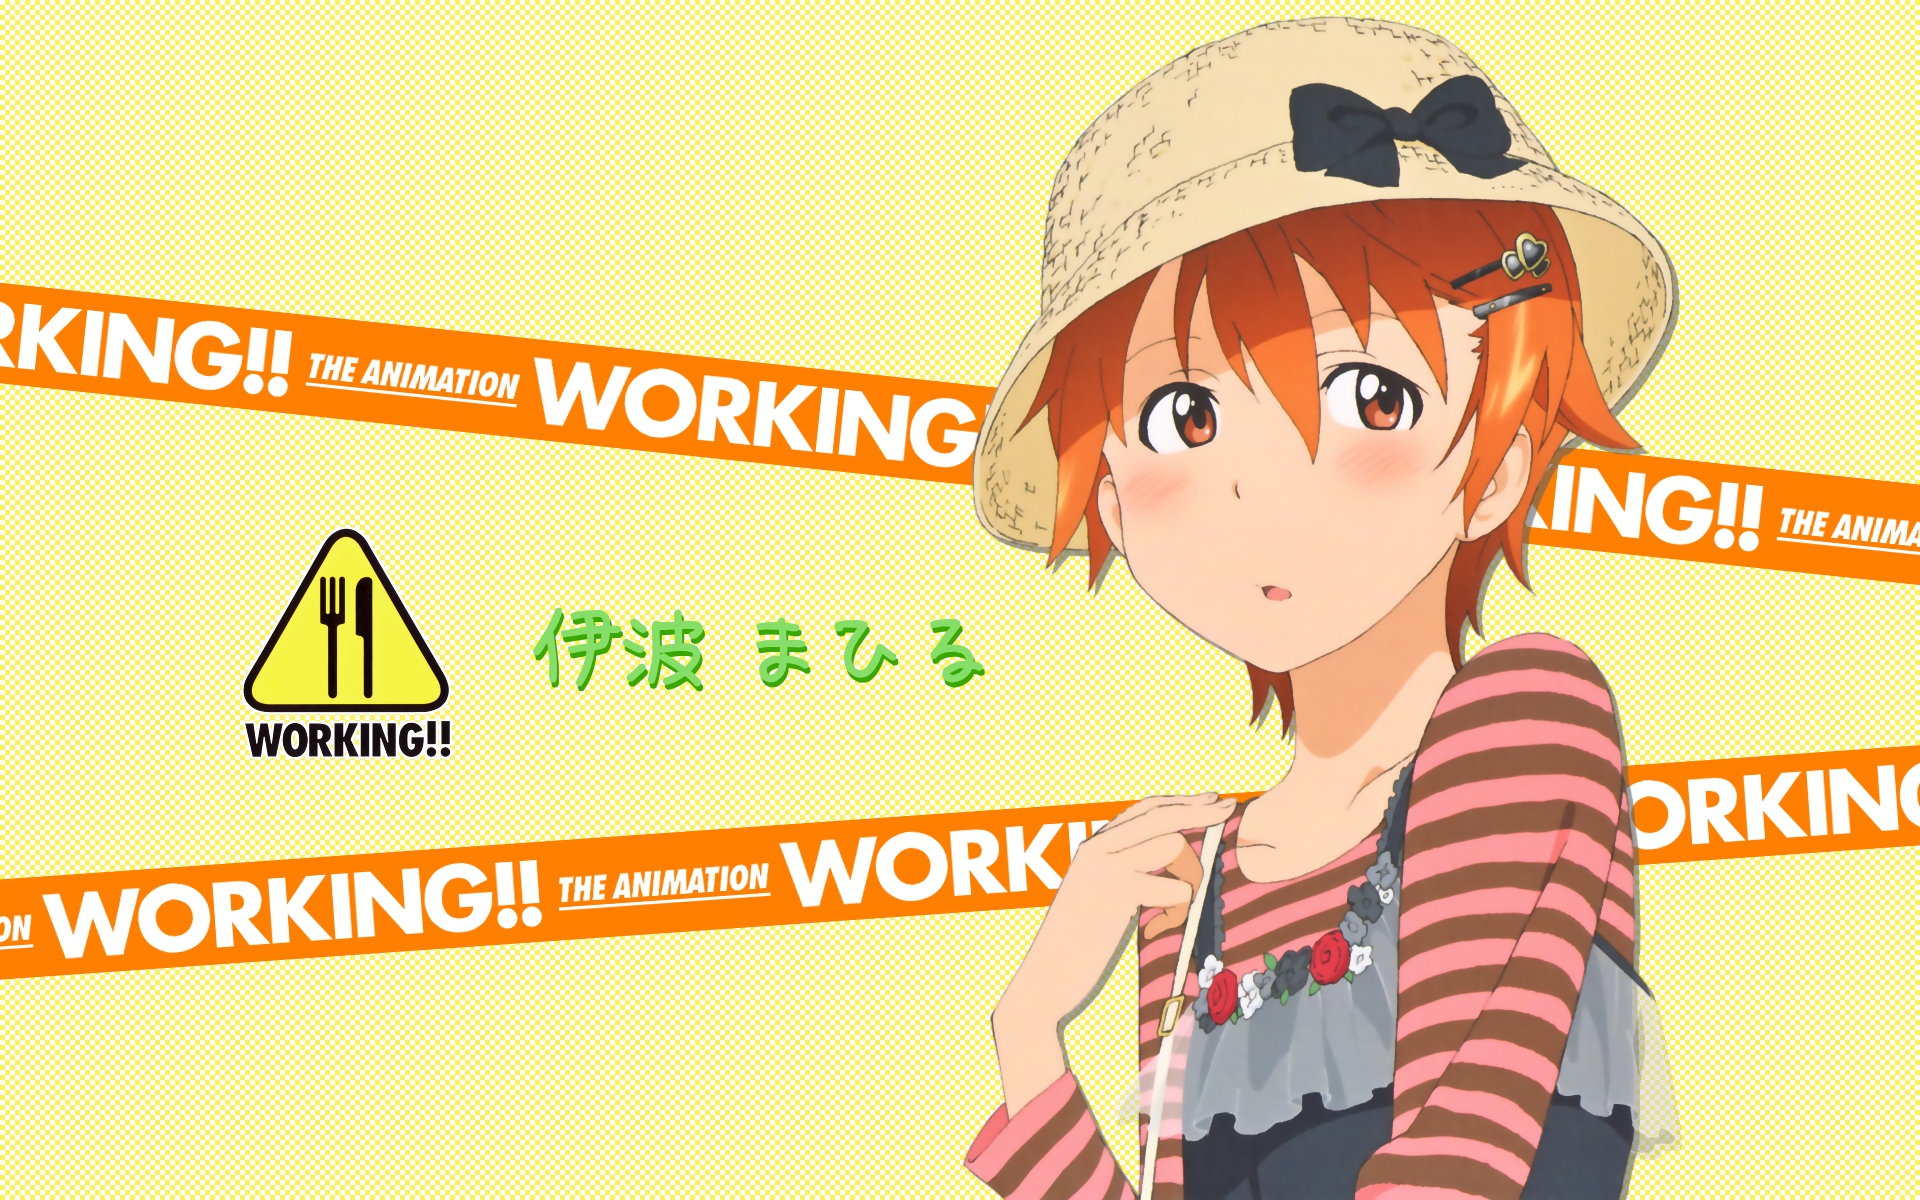 Anime wallpaper featuring characters from the series Working!!